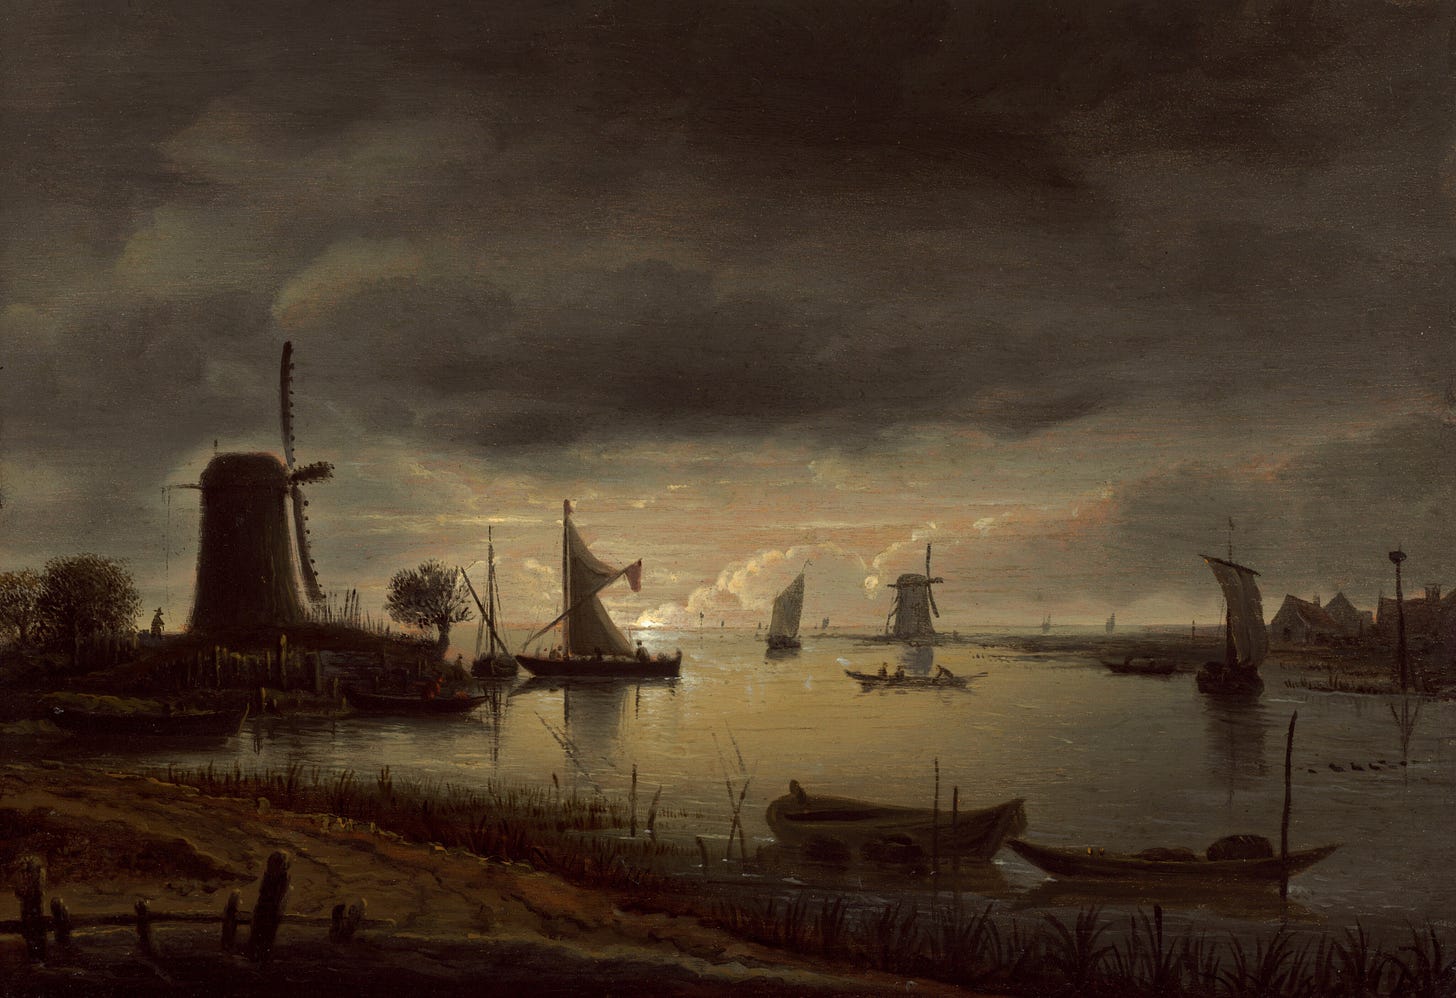 River Scene with Windmill and Boats, Evening, c. 1645 by Anthonie van Borssom